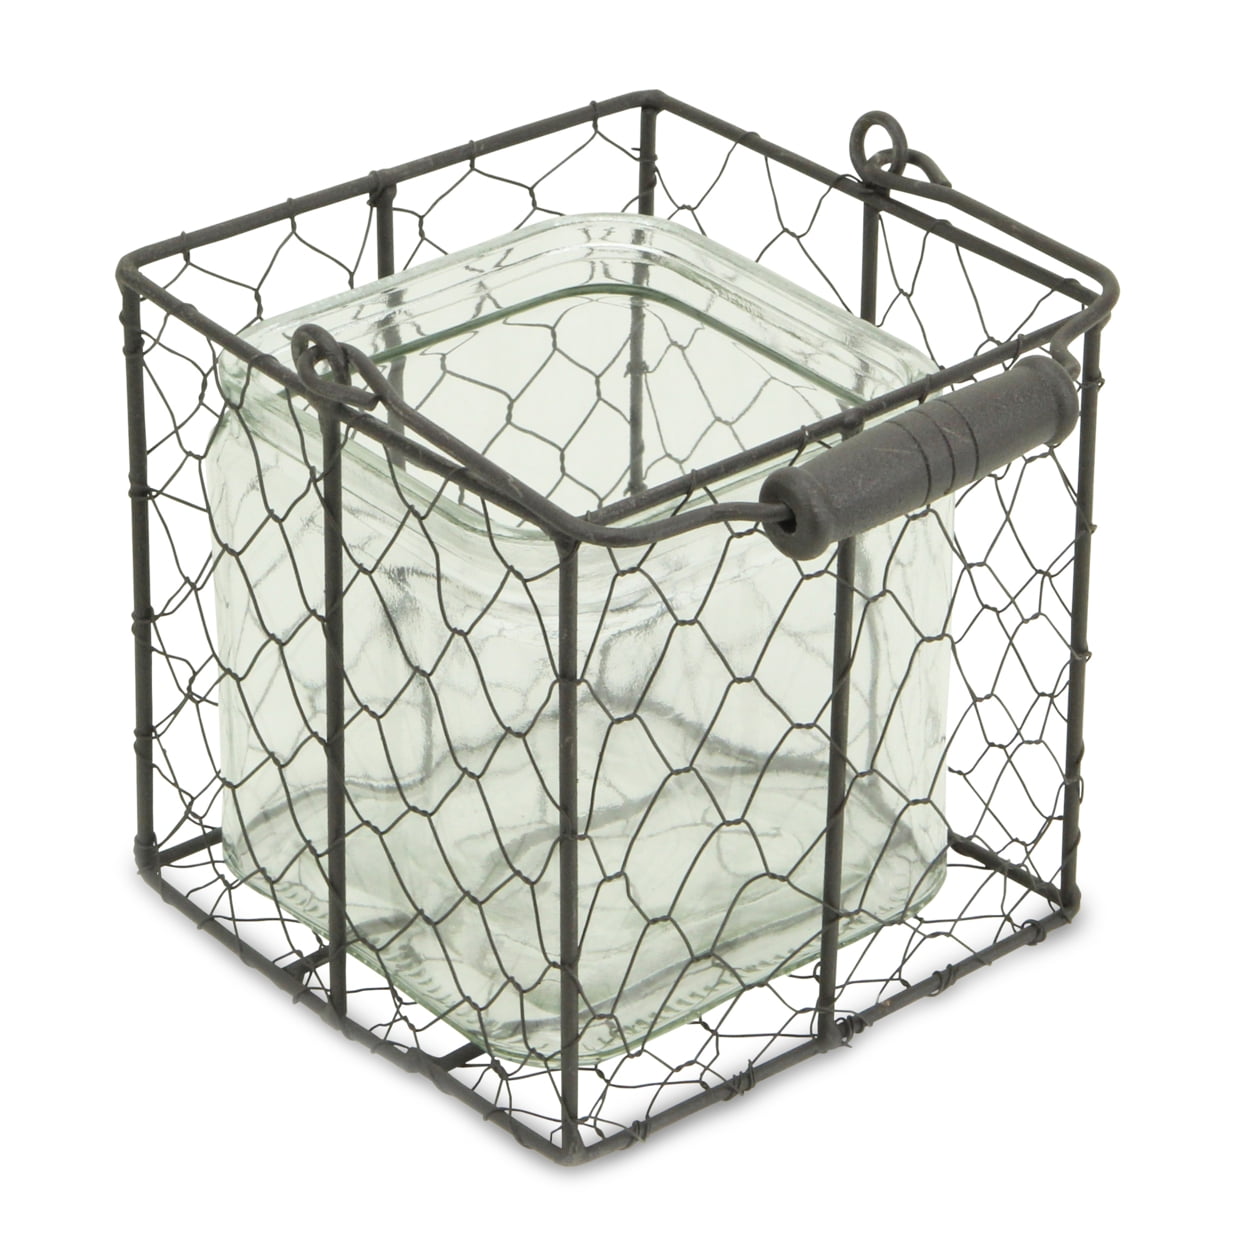 Picture of CheungsRattan 15S002BRL Square Glass Jar in Wire Basket, Brown - Large